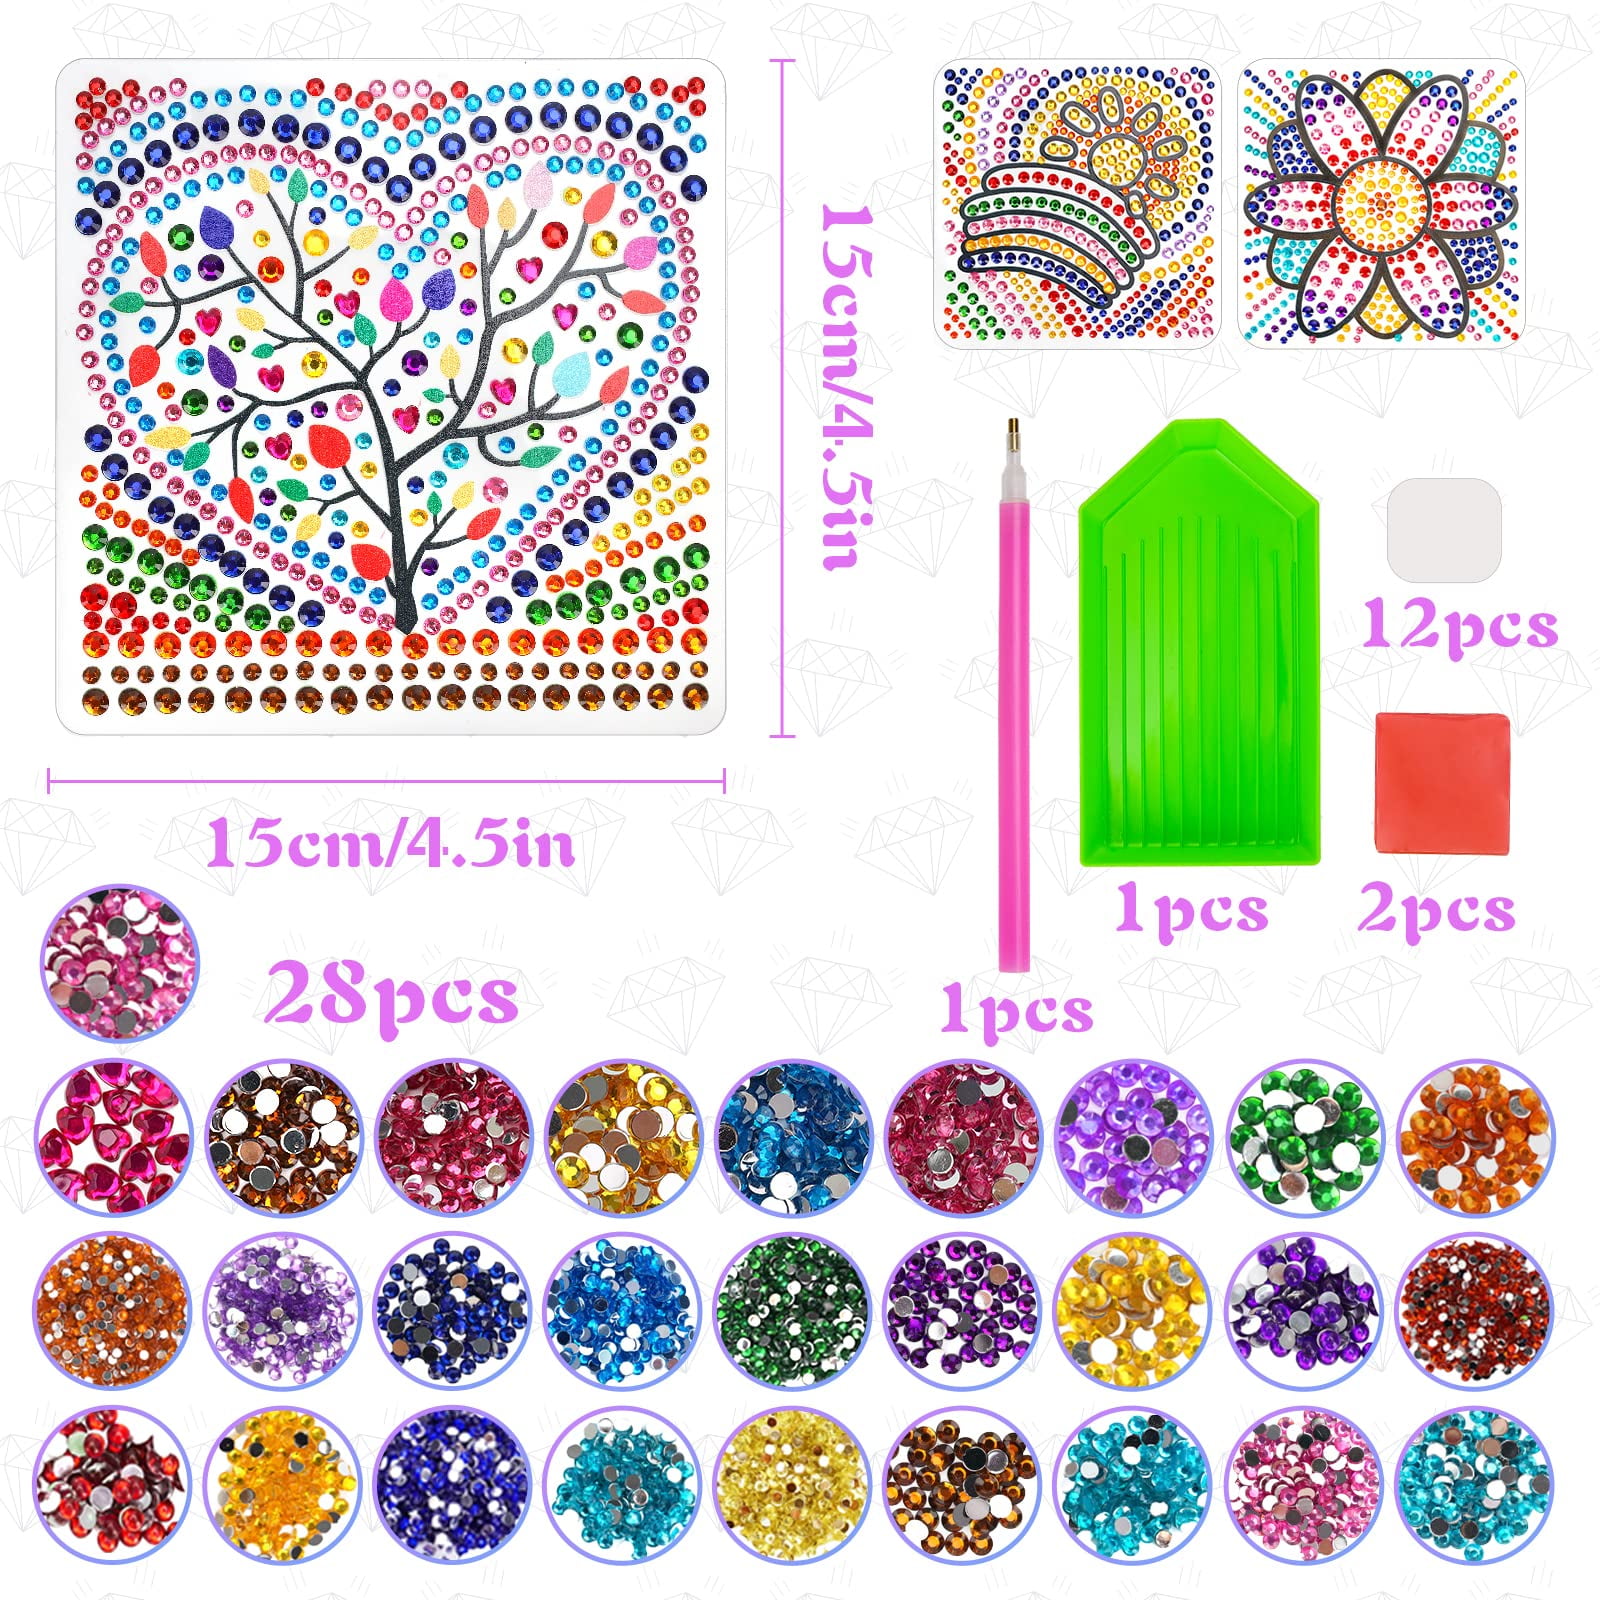 SUNNYPIG 5D Diamond Art for 8 9 10 11 12 Years Old Teens, Crafts Gifts for  Adult Kids Age 9-13 Paint by Numbers for Children Elephant Diamond Painting  Kits for 10 11 13 Years Old Girls Boys 